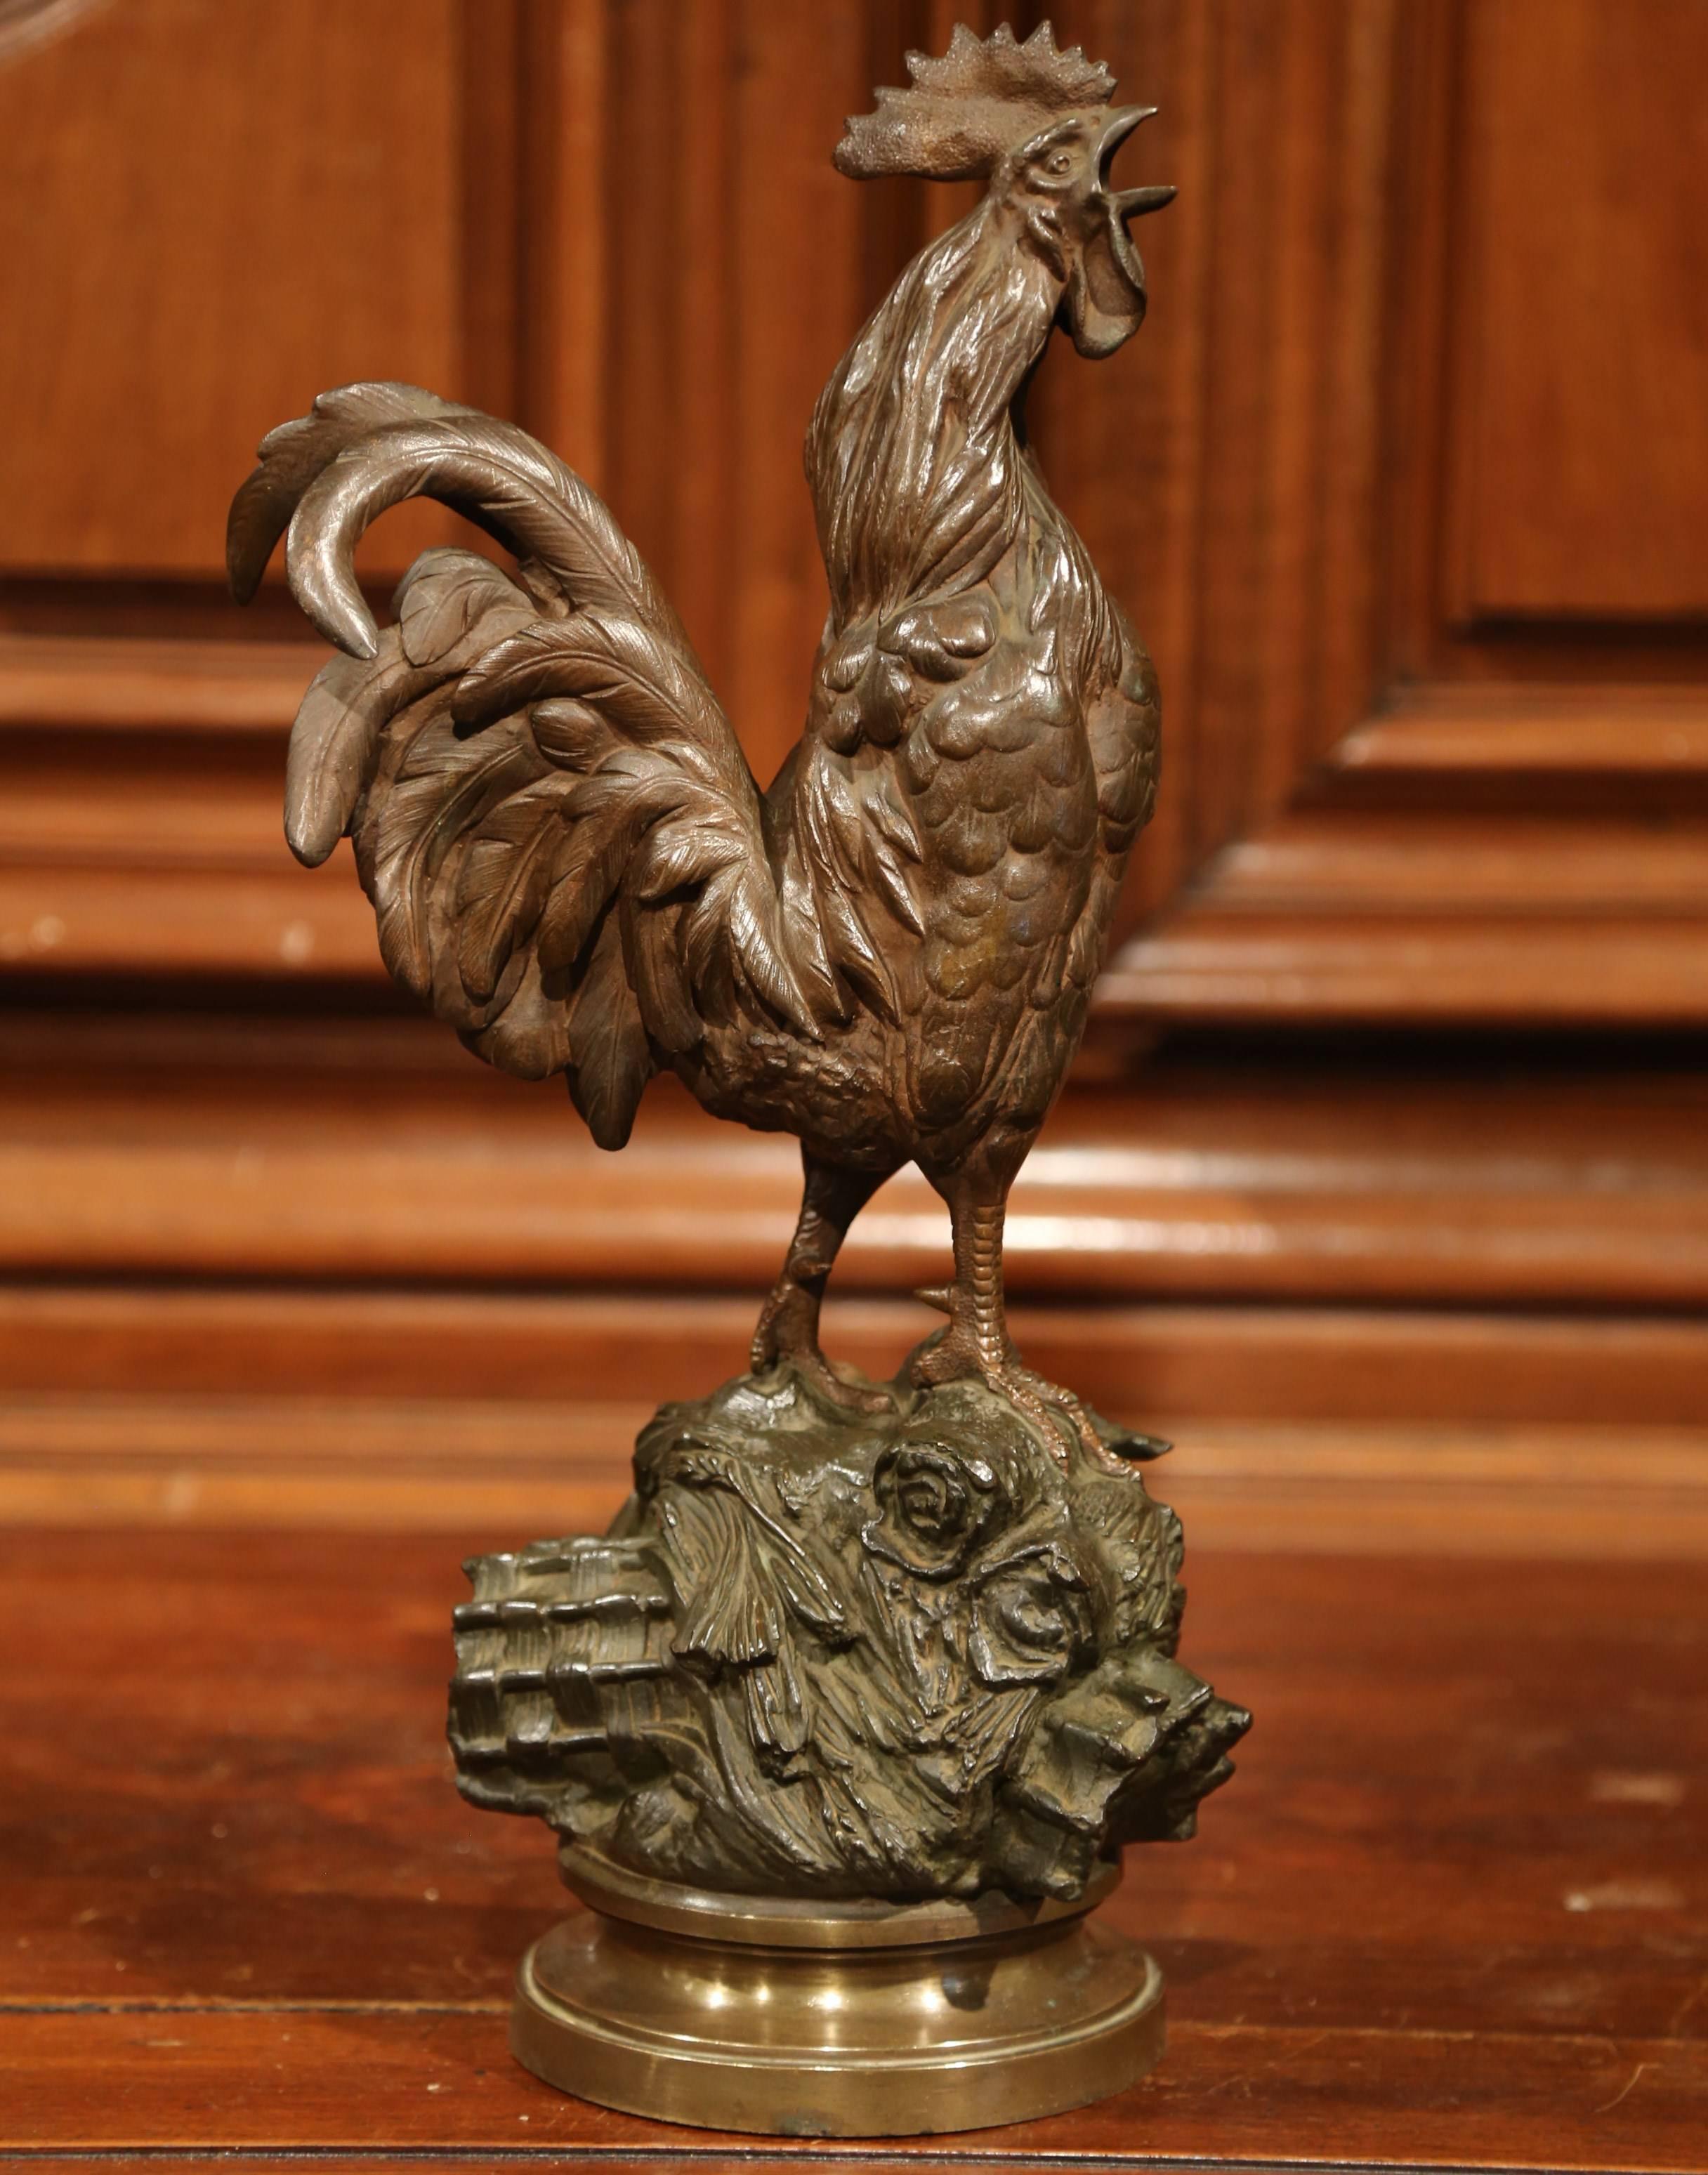 This classic, antique, bronze traditional symbol of France sculpture was sculpted, circa 1880. The proud rooster is in excellent condition, has a rich patina, and is set on a sturdy base with, wheel, rocks, leaves and wheat. This tall piece is